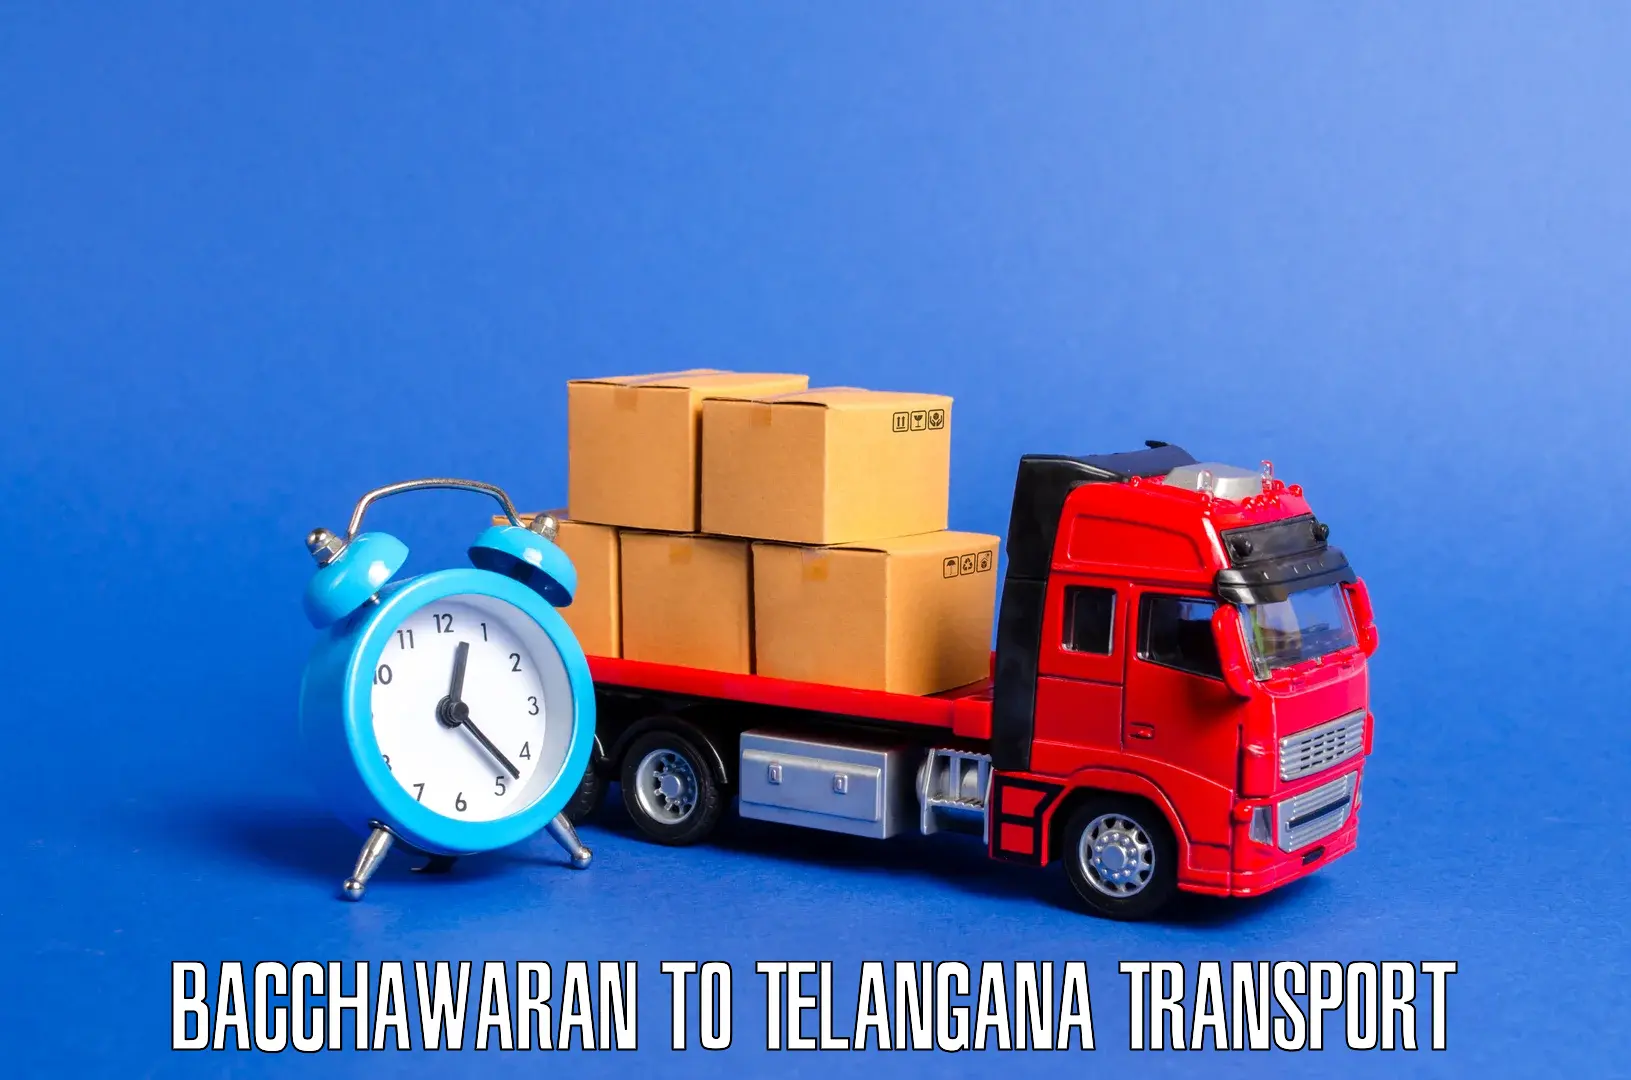 Nearby transport service Bacchawaran to Manneguda